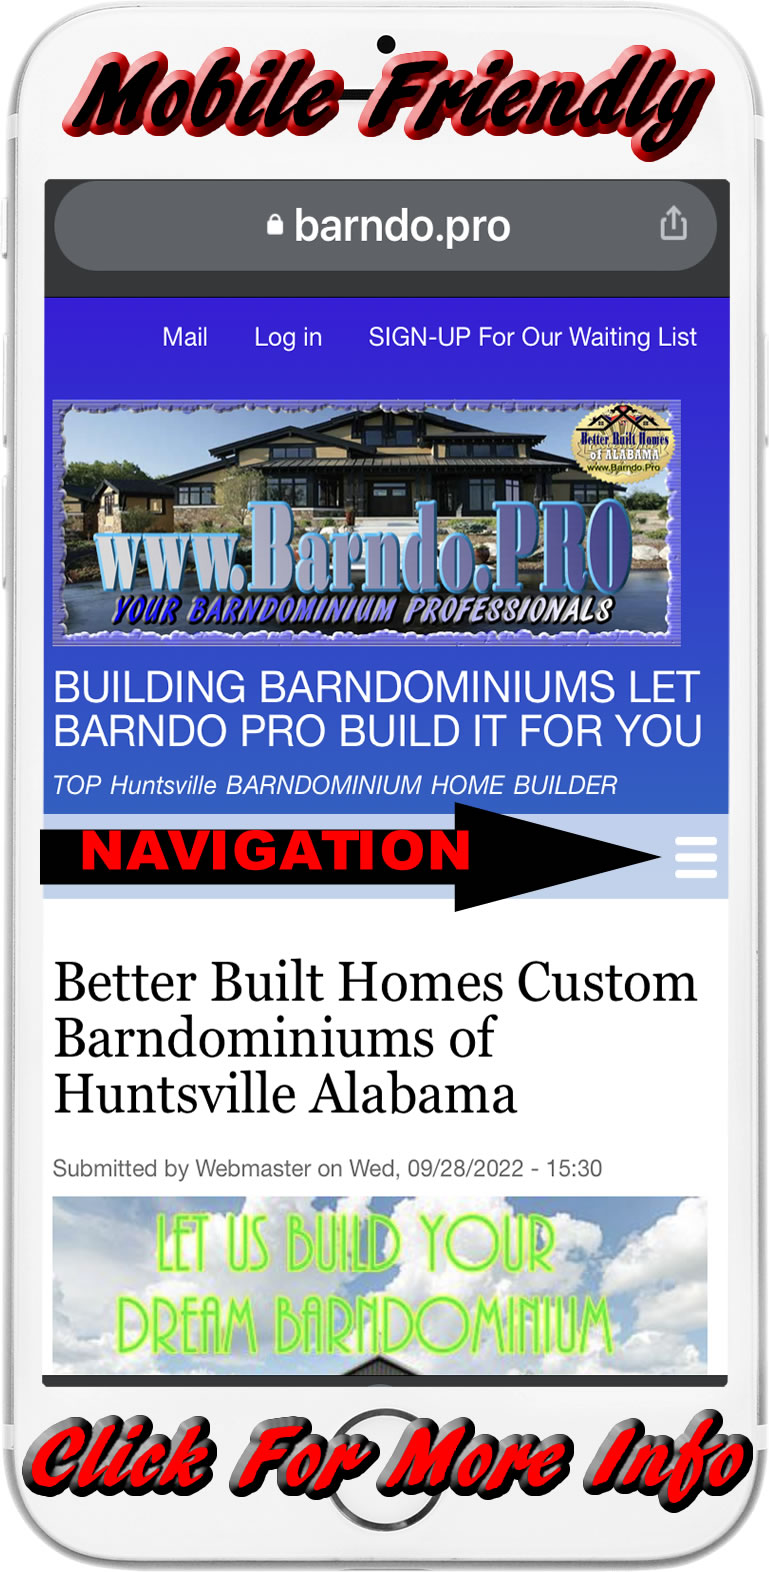 Barndo.PRO is a Responsive Mobile App which means Our Website is Designed to work on your Mobile Device